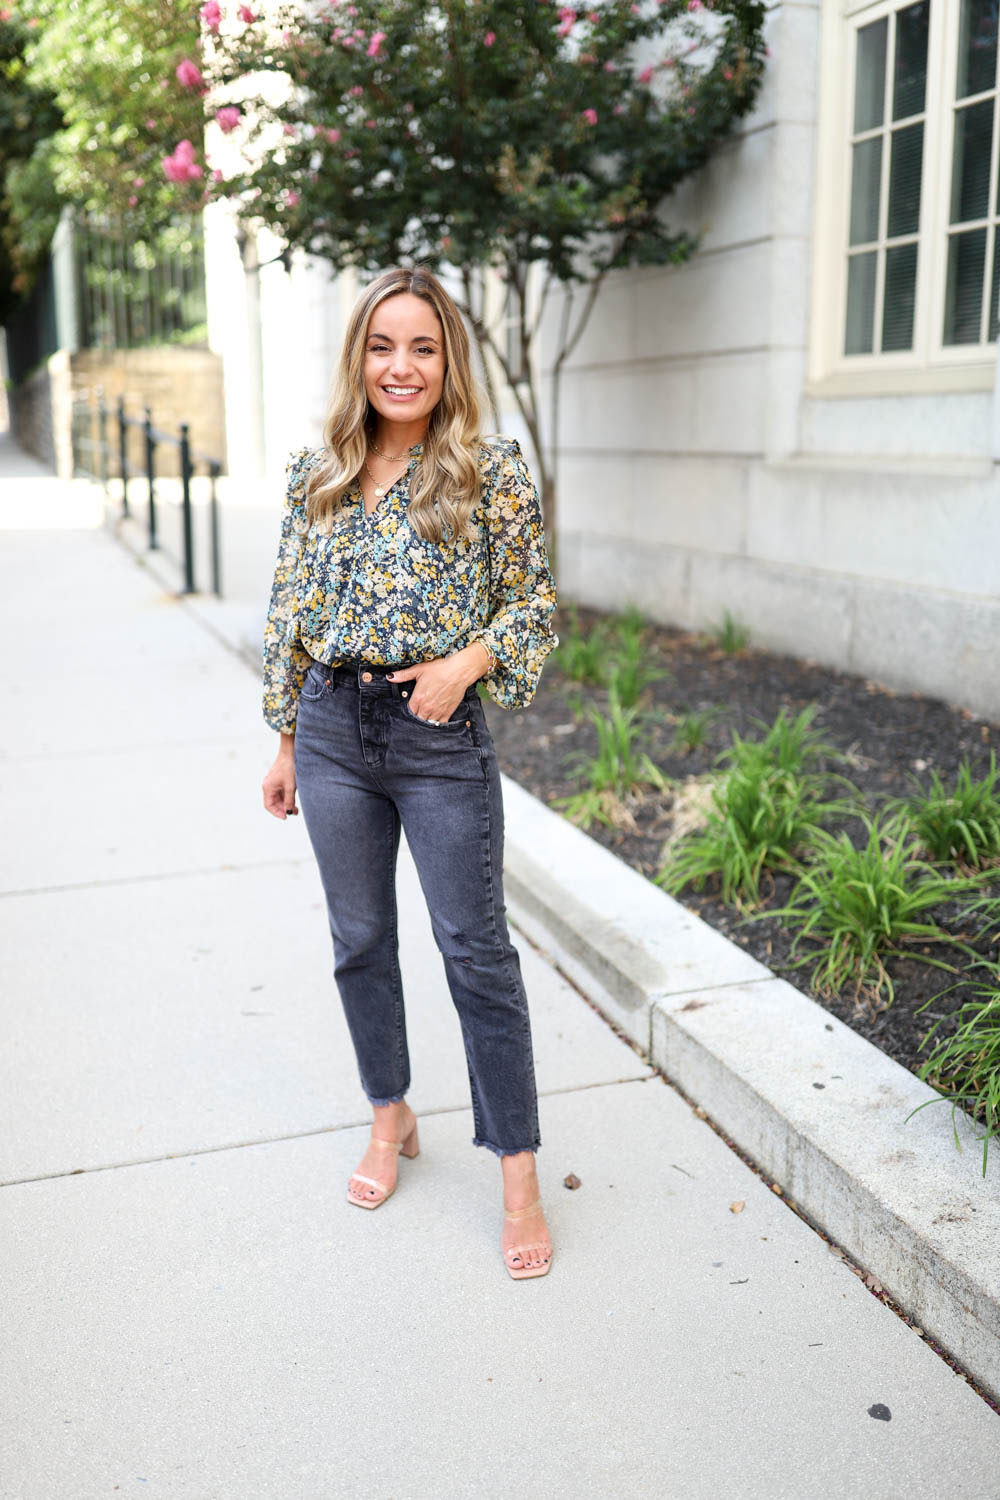 Petite friendly one week of outfits with LOFT petites | petite friendly outfits | black jeans outfits | charcoal jeans outfits 